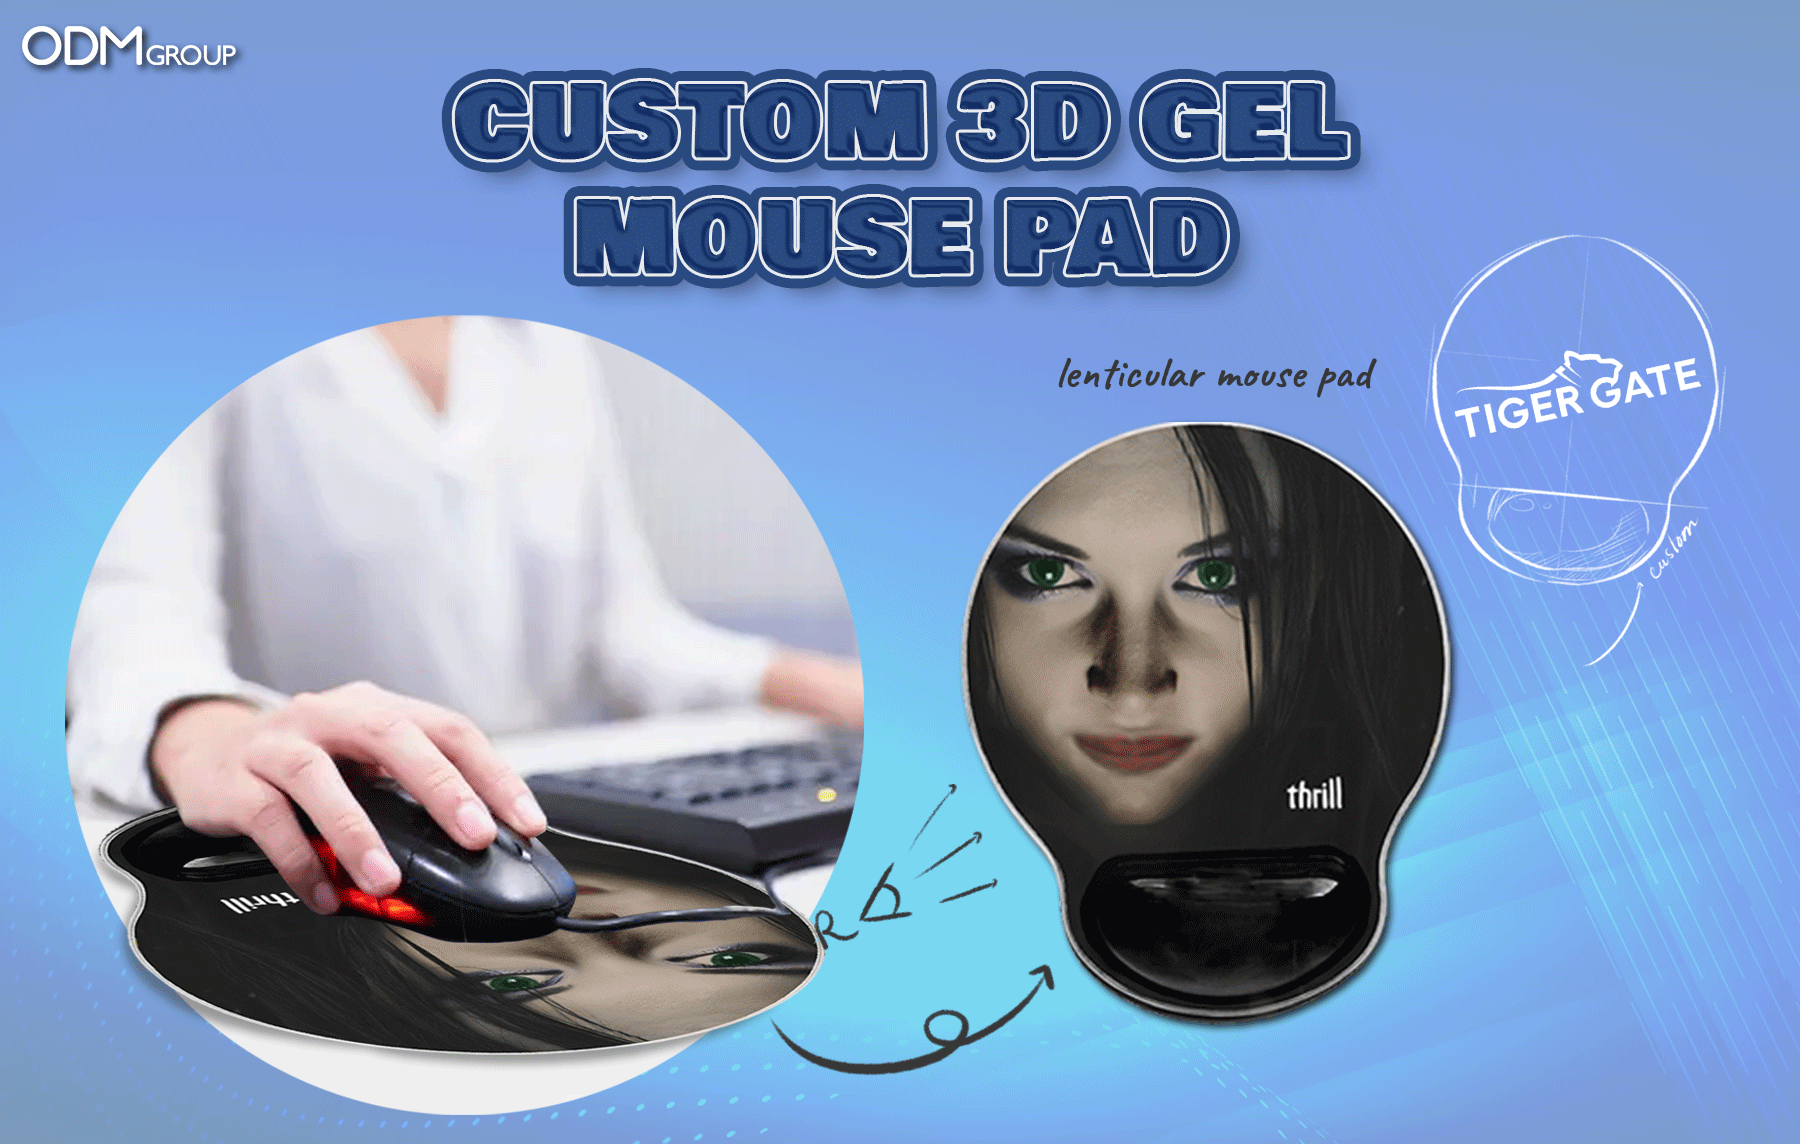 Custom 3D gel mouse pad with ergonomic wrist support.